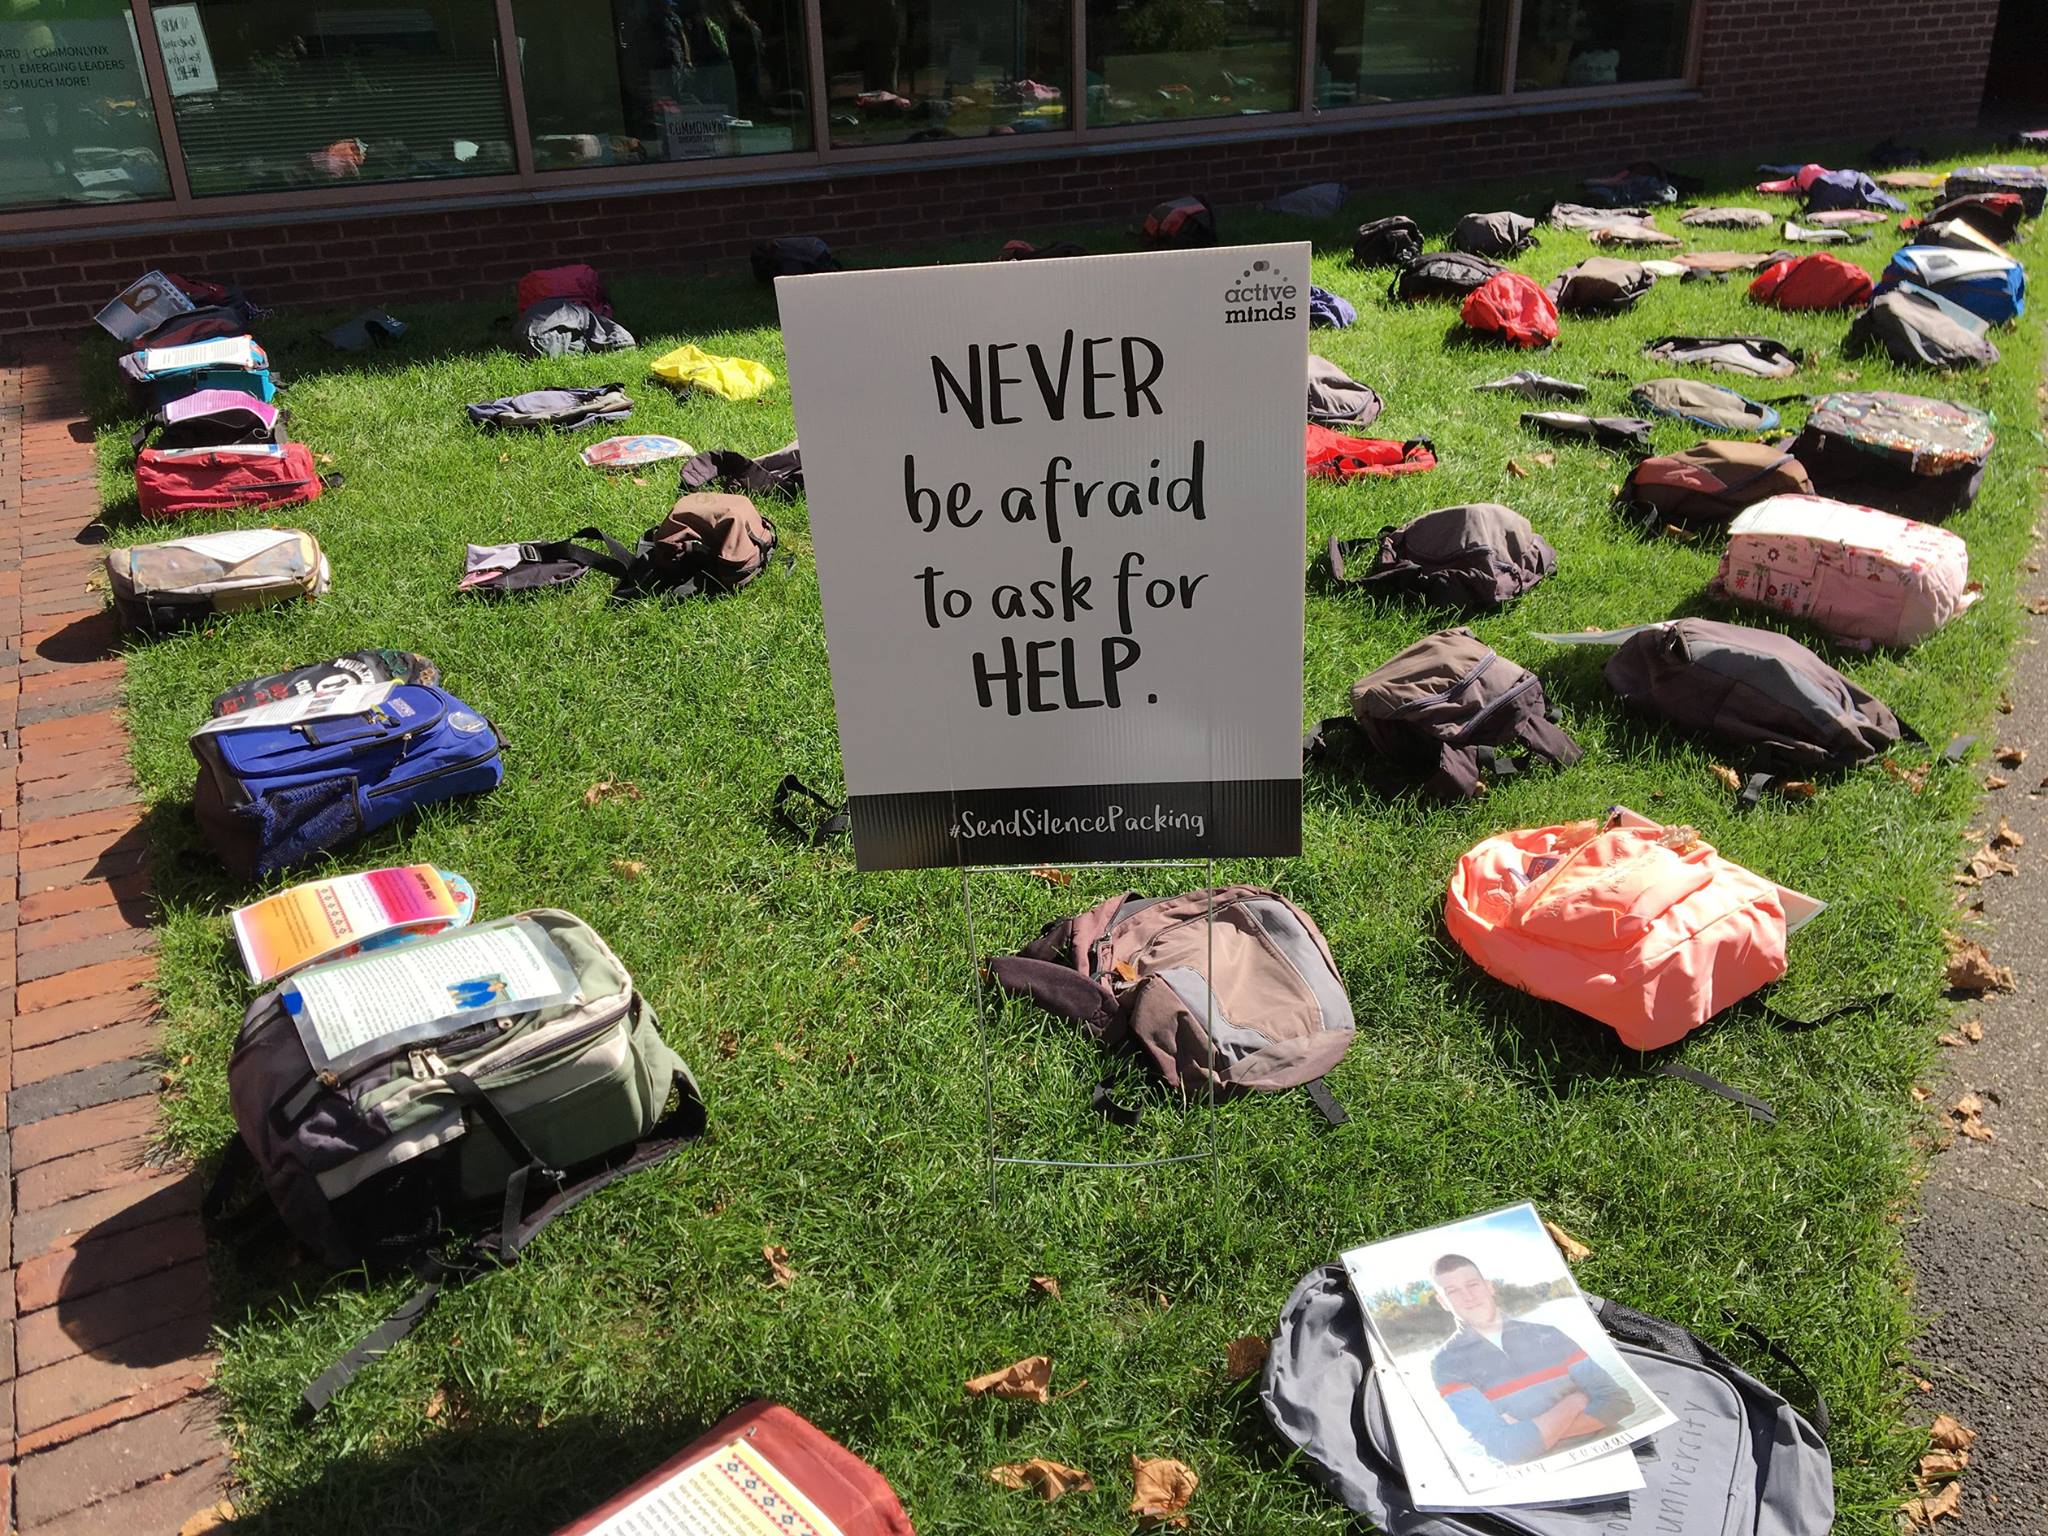 Backpacks on the grass of Doble Quad for Send Silence Packing event.